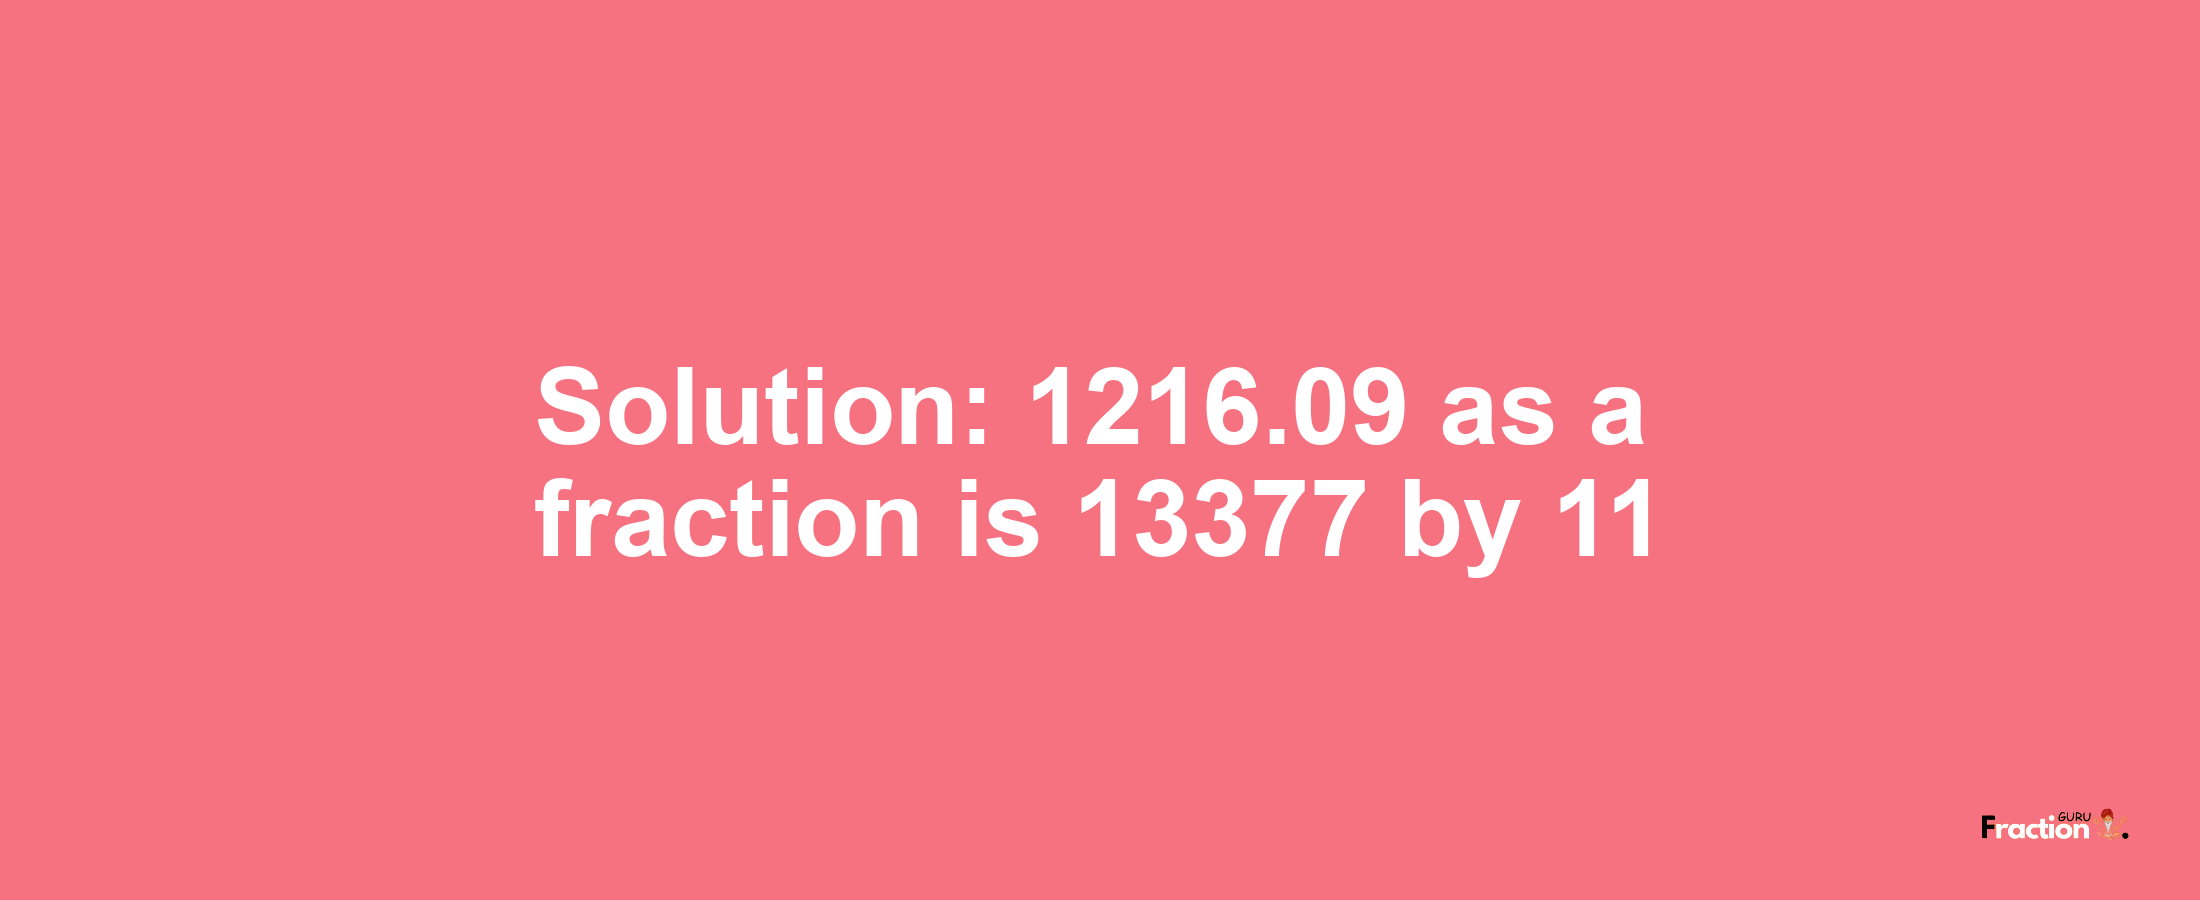 Solution:1216.09 as a fraction is 13377/11